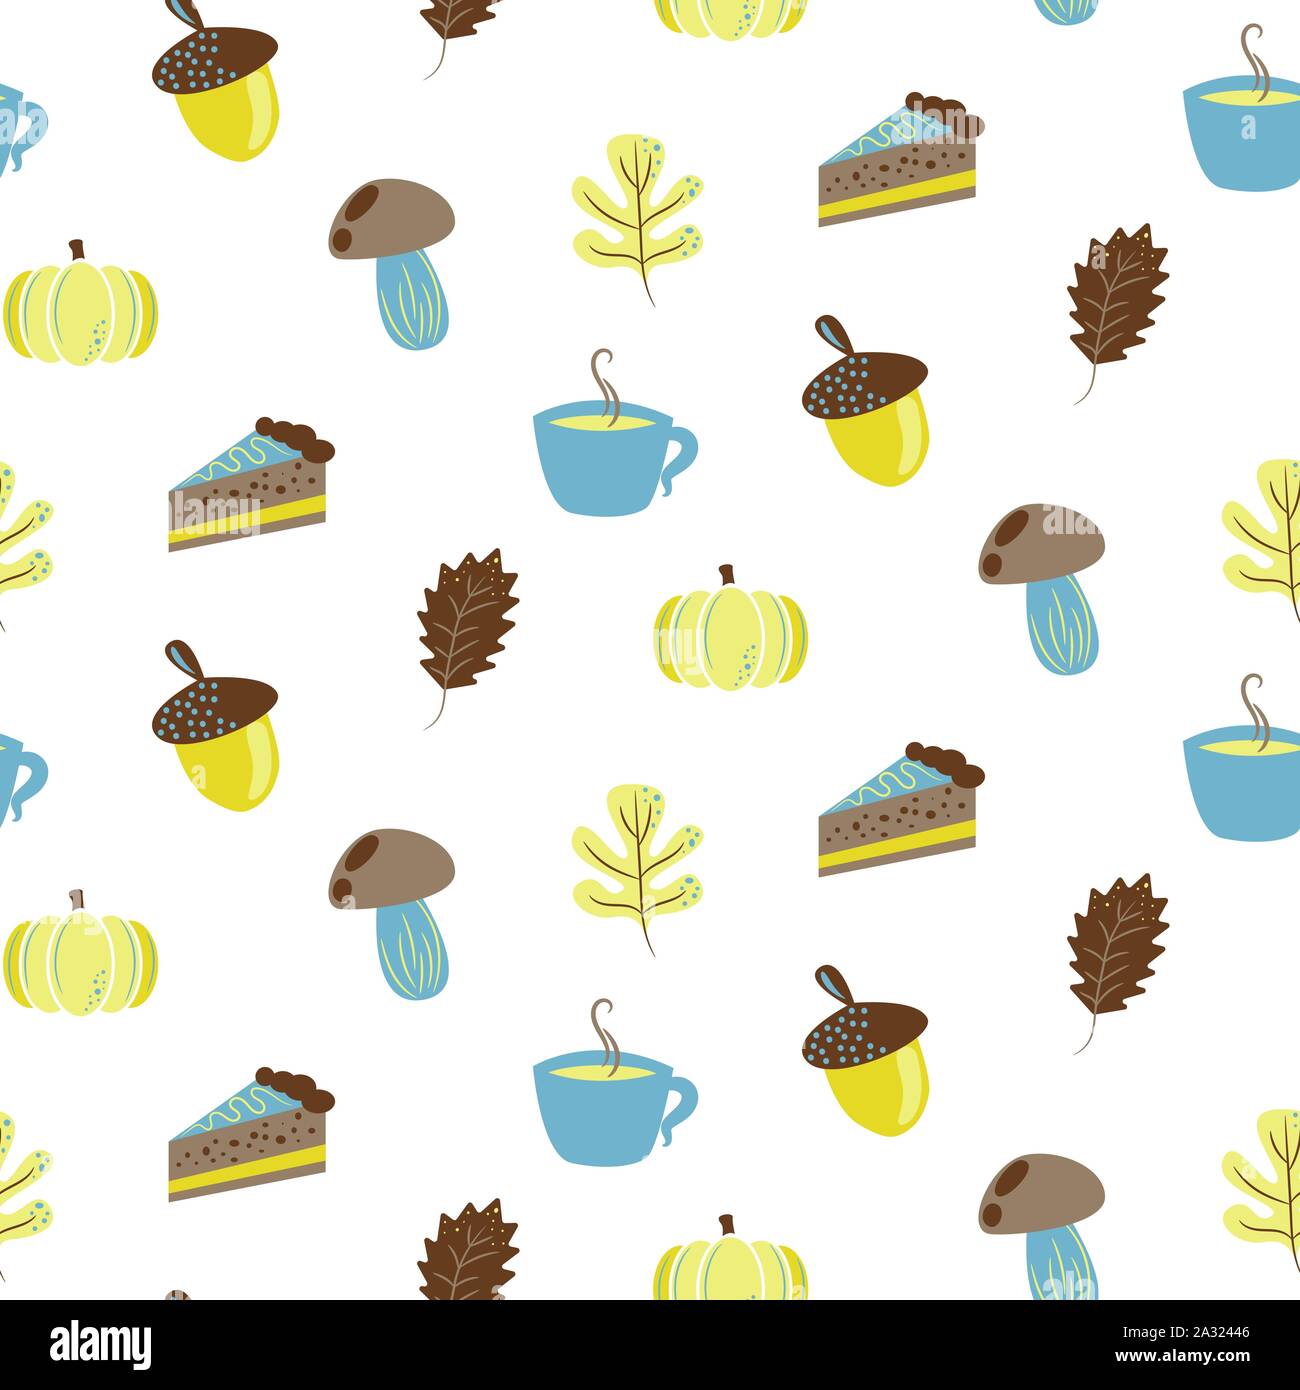 Autumn harvest objects pumpkin, acorn, pie, mushroom and leaves. Fall seamless pattern in blue and yellow colors. Stock Vector